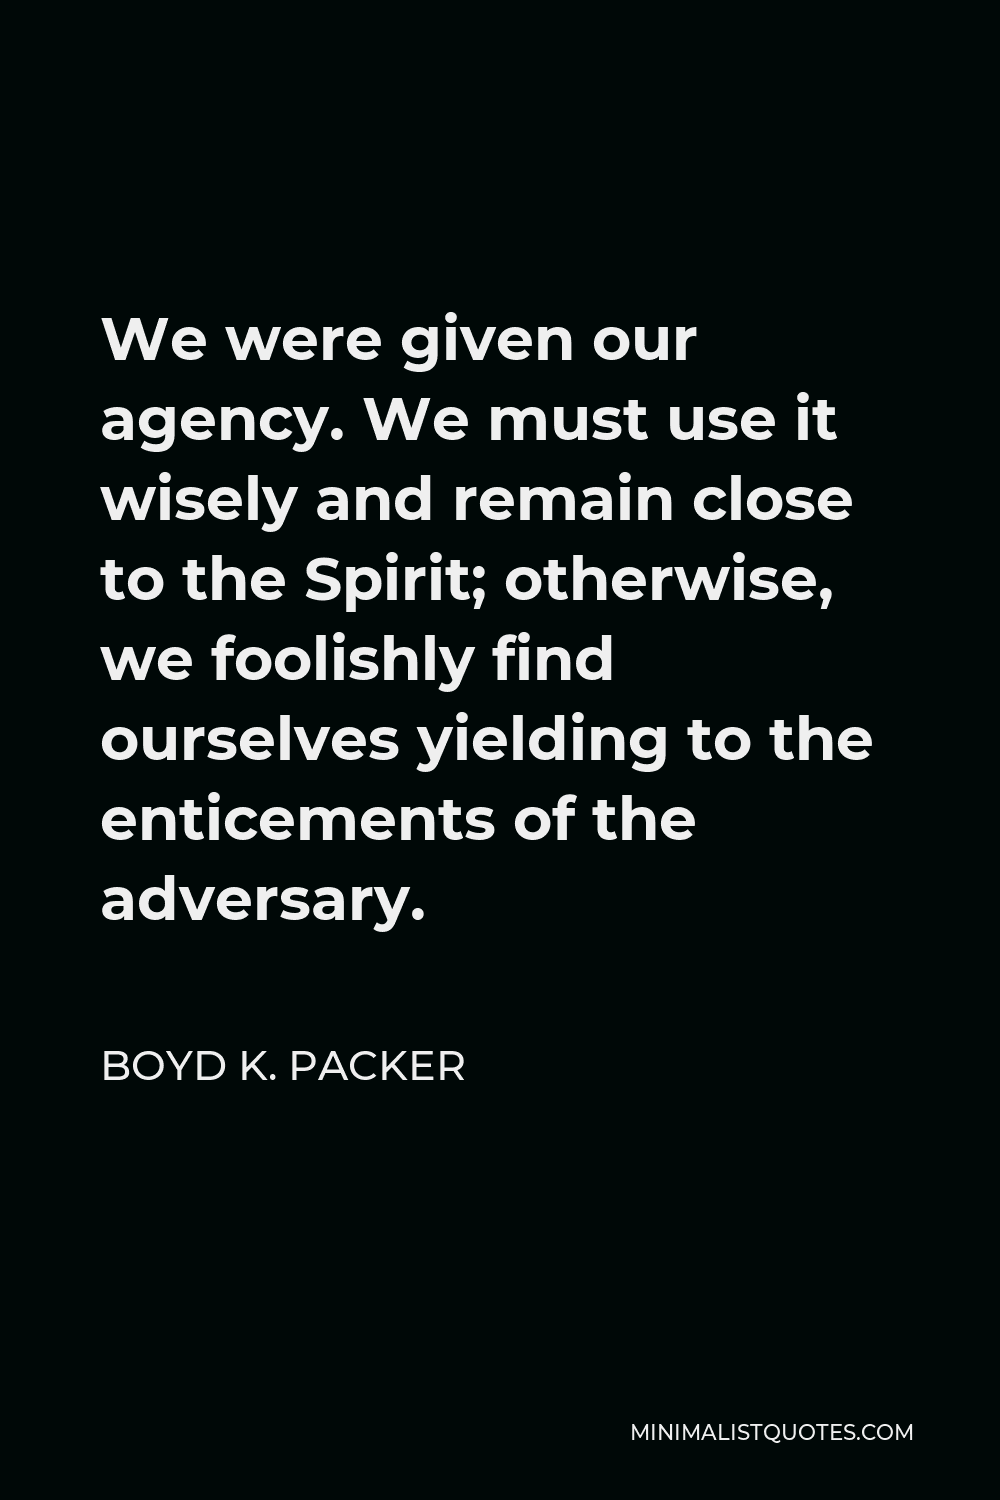 Boyd K. Packer Quote - We were given our agency. We must use it wisely and remain close to the Spirit; otherwise, we foolishly find ourselves yielding to the enticements of the adversary.